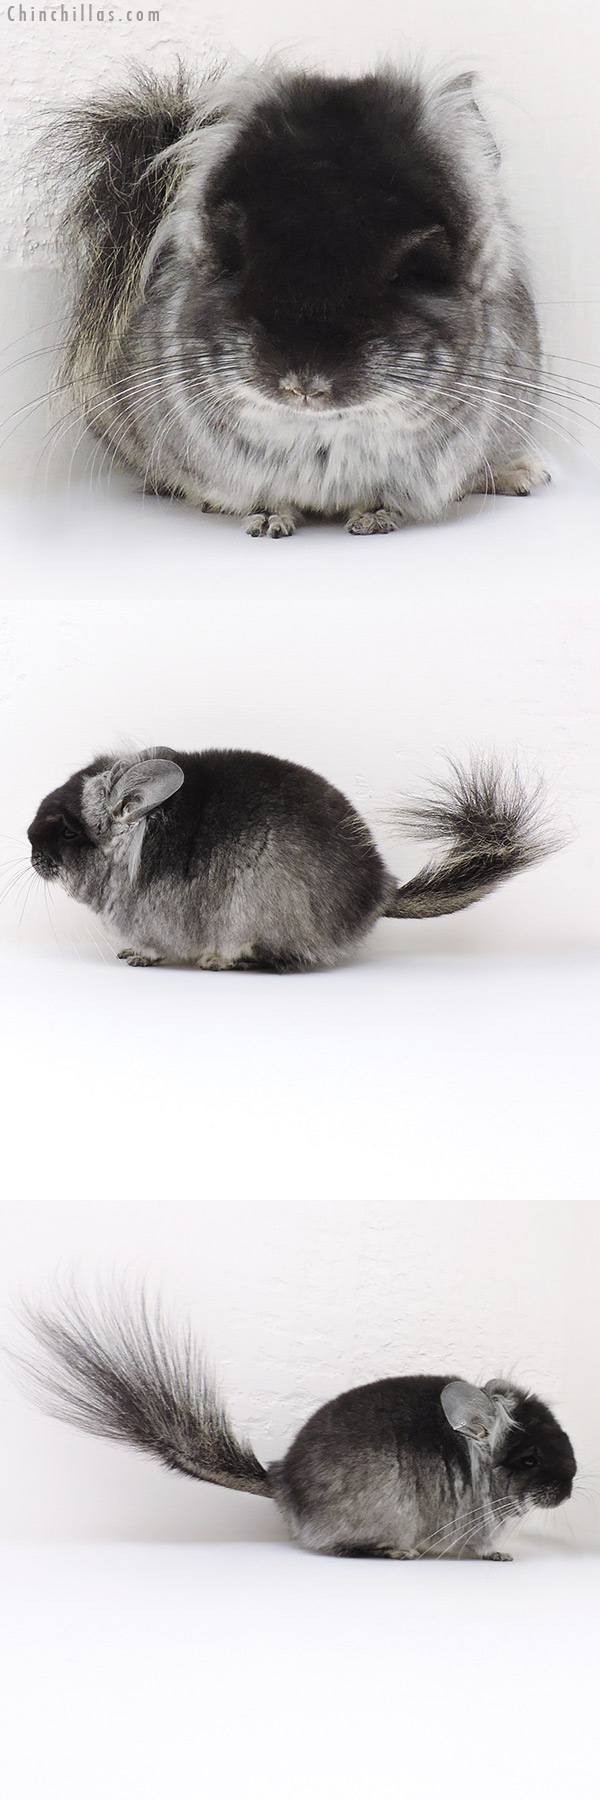 Chinchilla or related item offered for sale or export on Chinchillas.com - 16251 Exceptional Black Velvet ( Violet Carrier )  Royal Persian Angora Male Chinchilla with long Ear Tufts